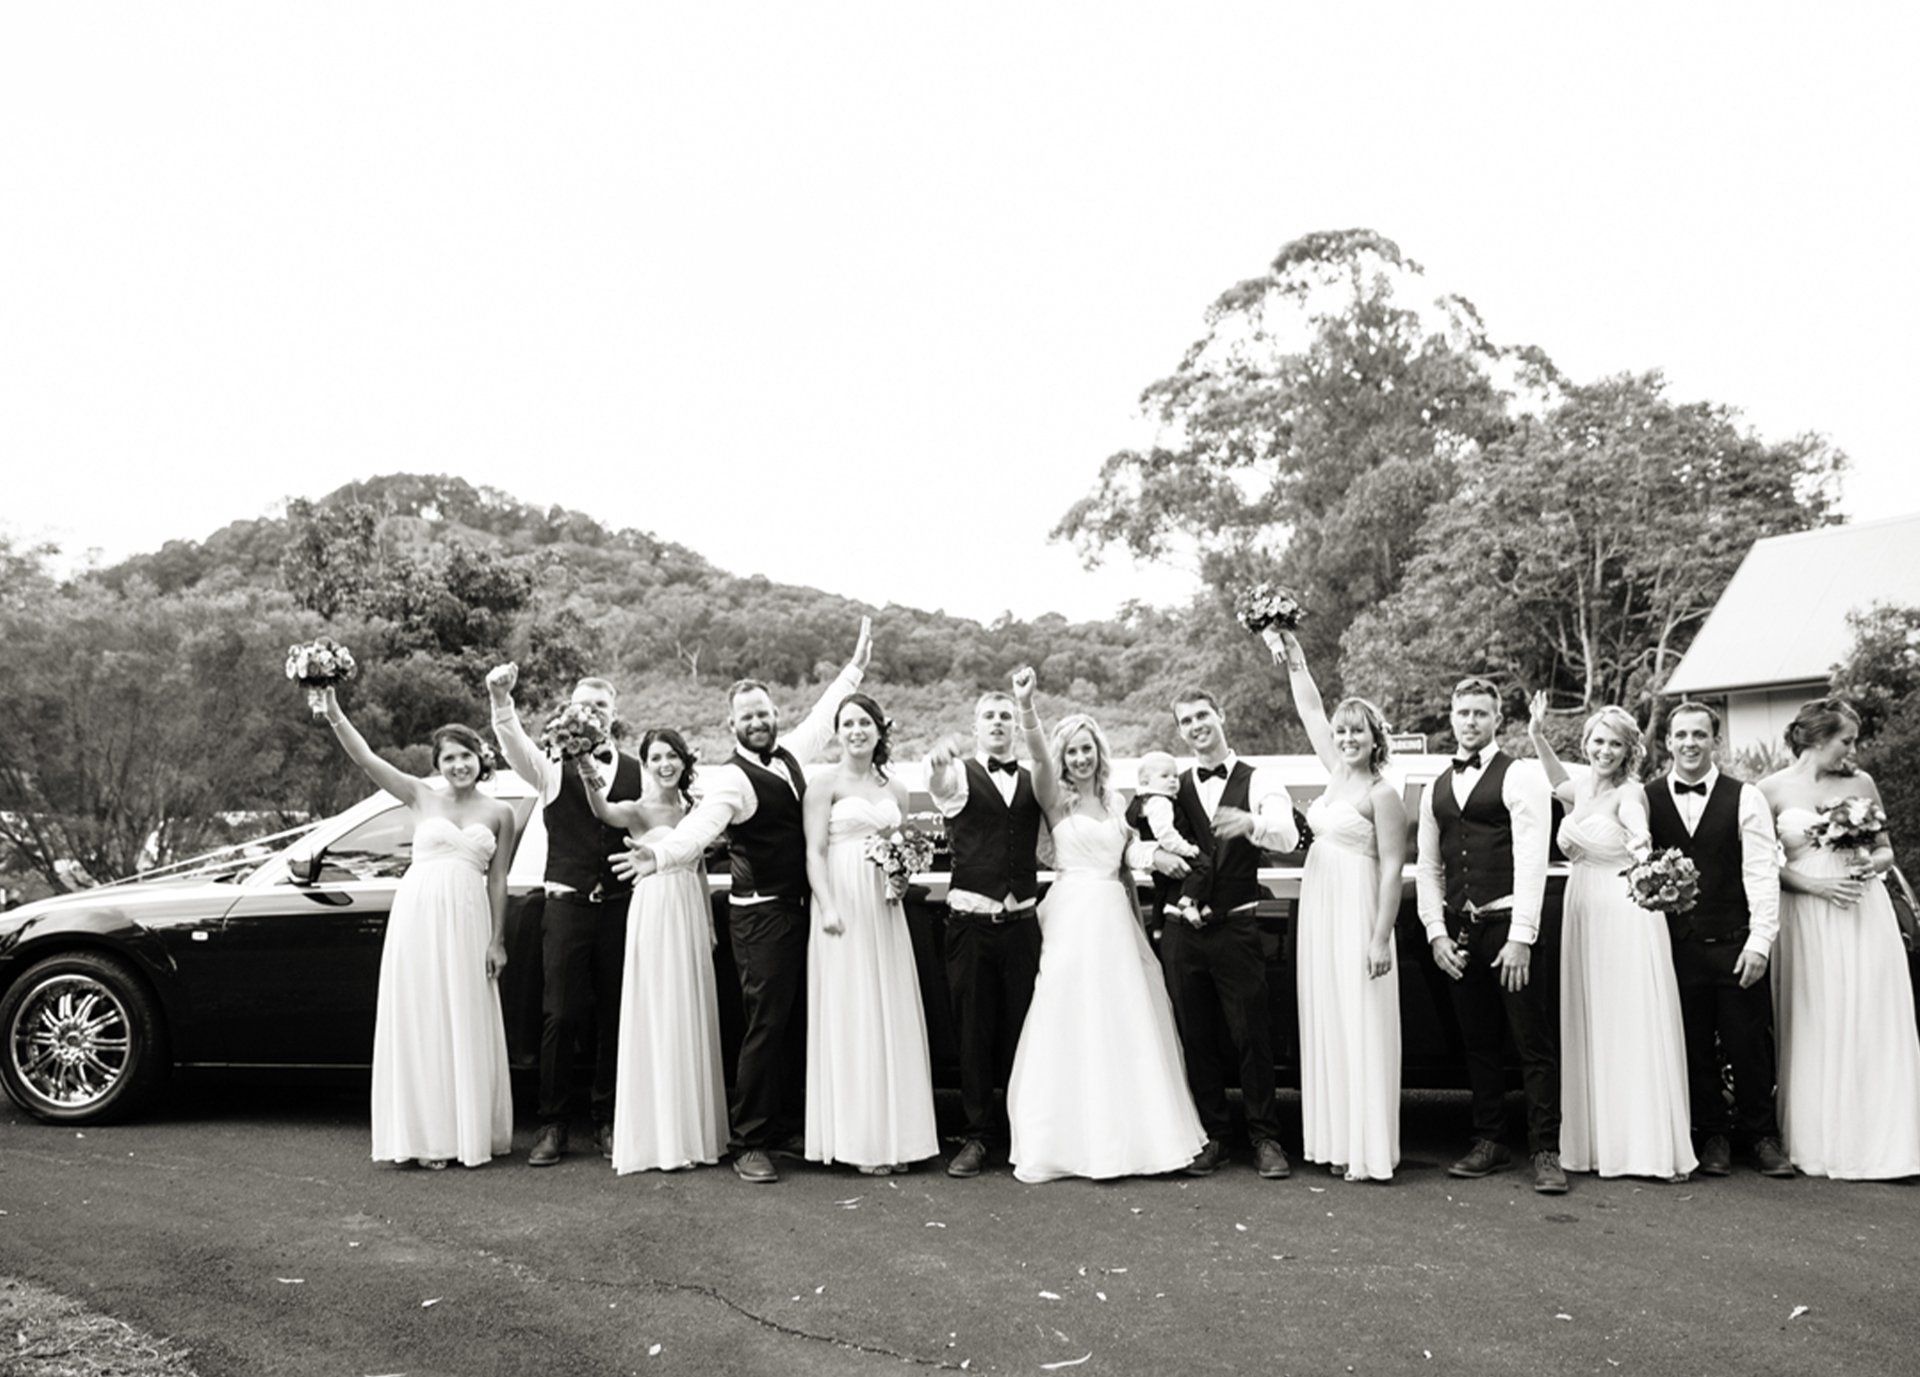 Limousine Behind The Brides And Grooms Maid — Superstretch300 Limousines in Golden Beach, QLD